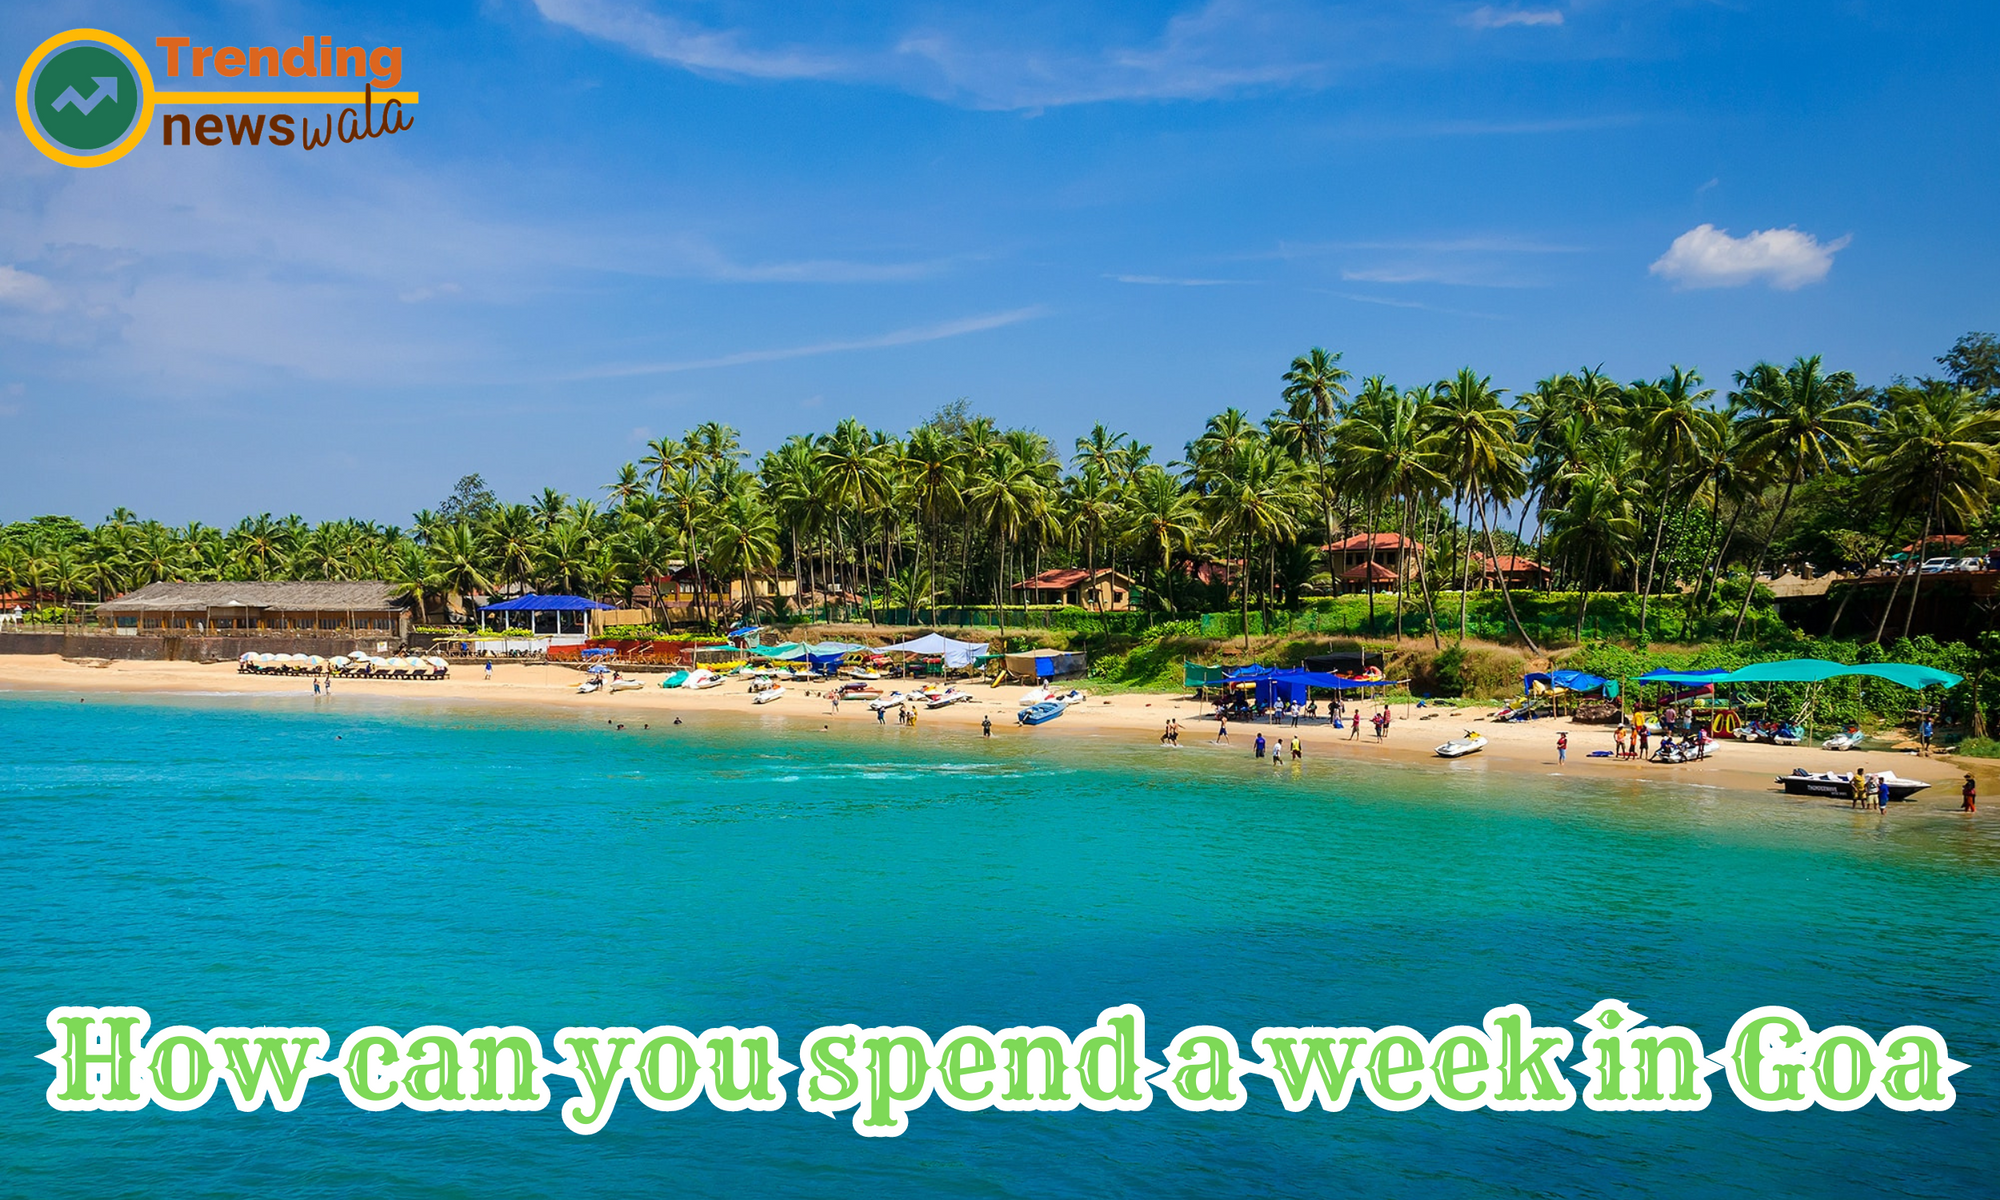 How can you spend a week in Goa?